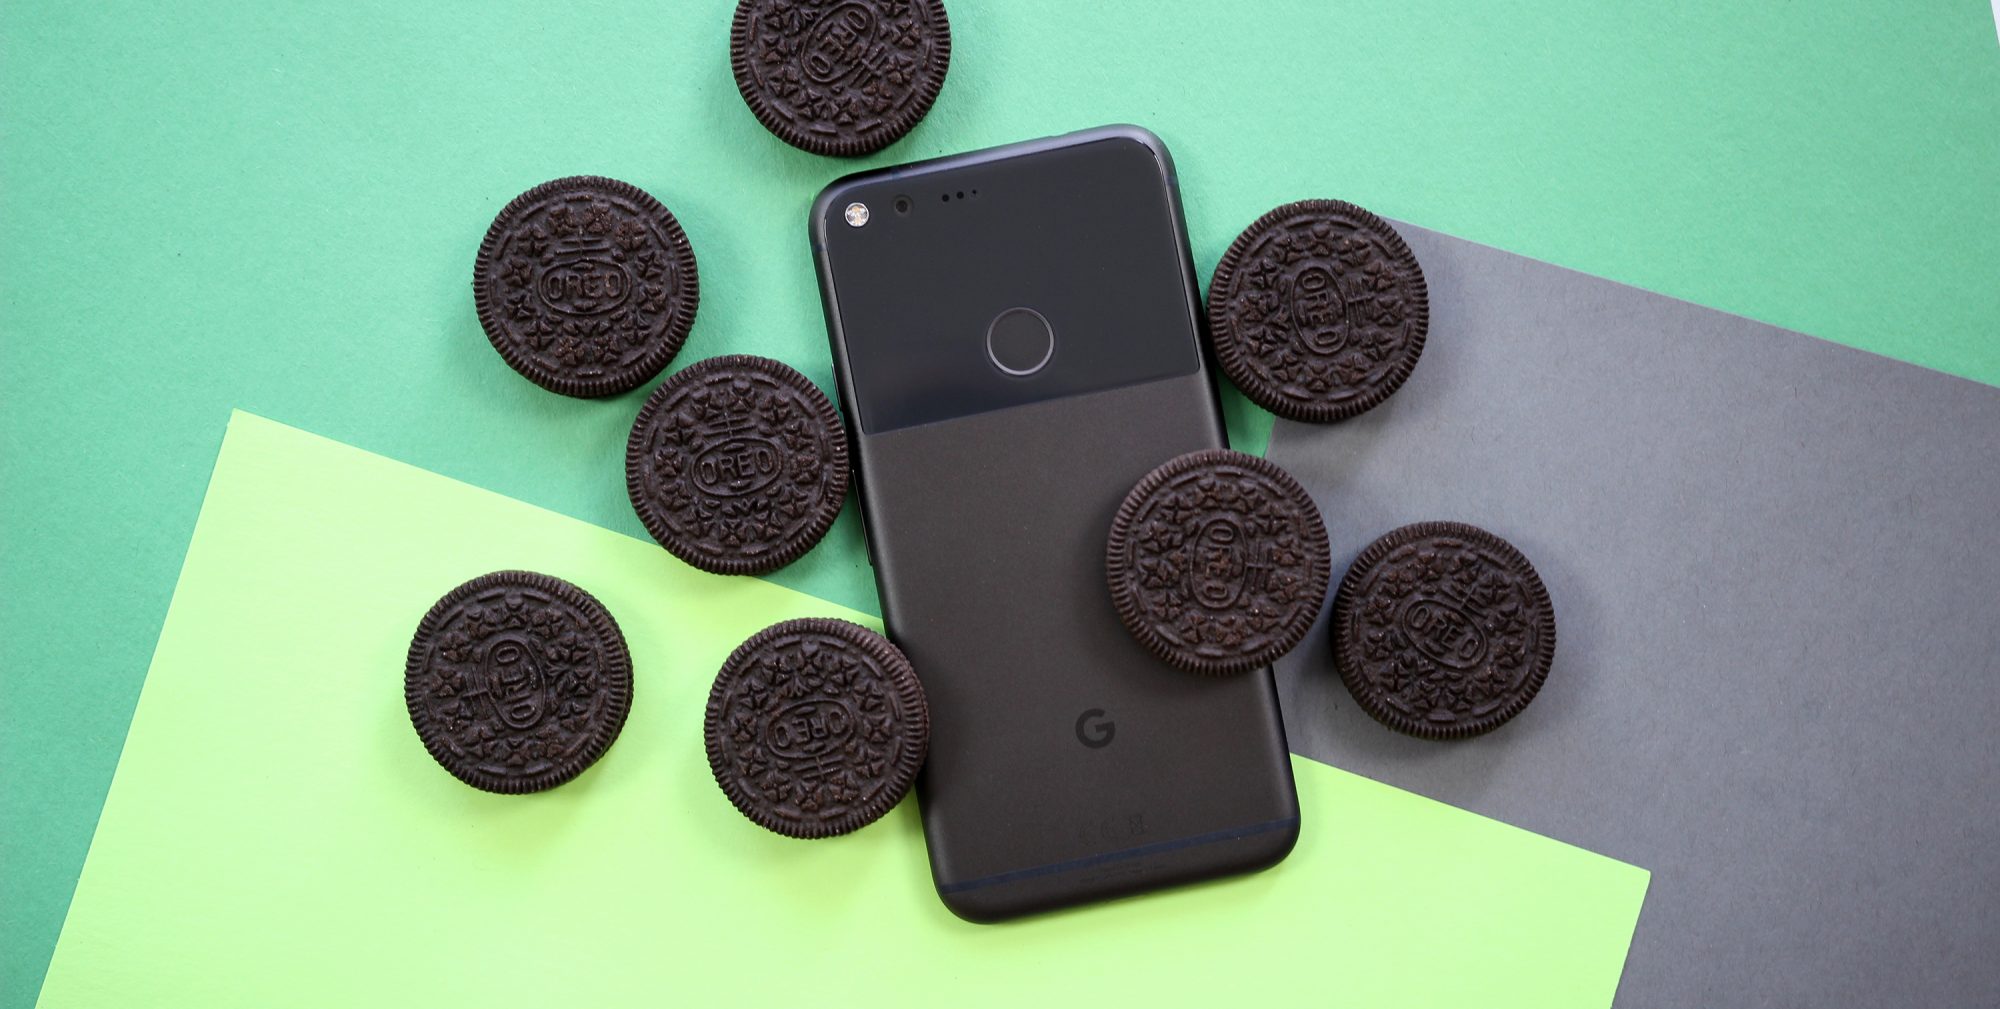 Android O Stock Wallpaper2 Androidsage - Android Oreo - HD Wallpaper 